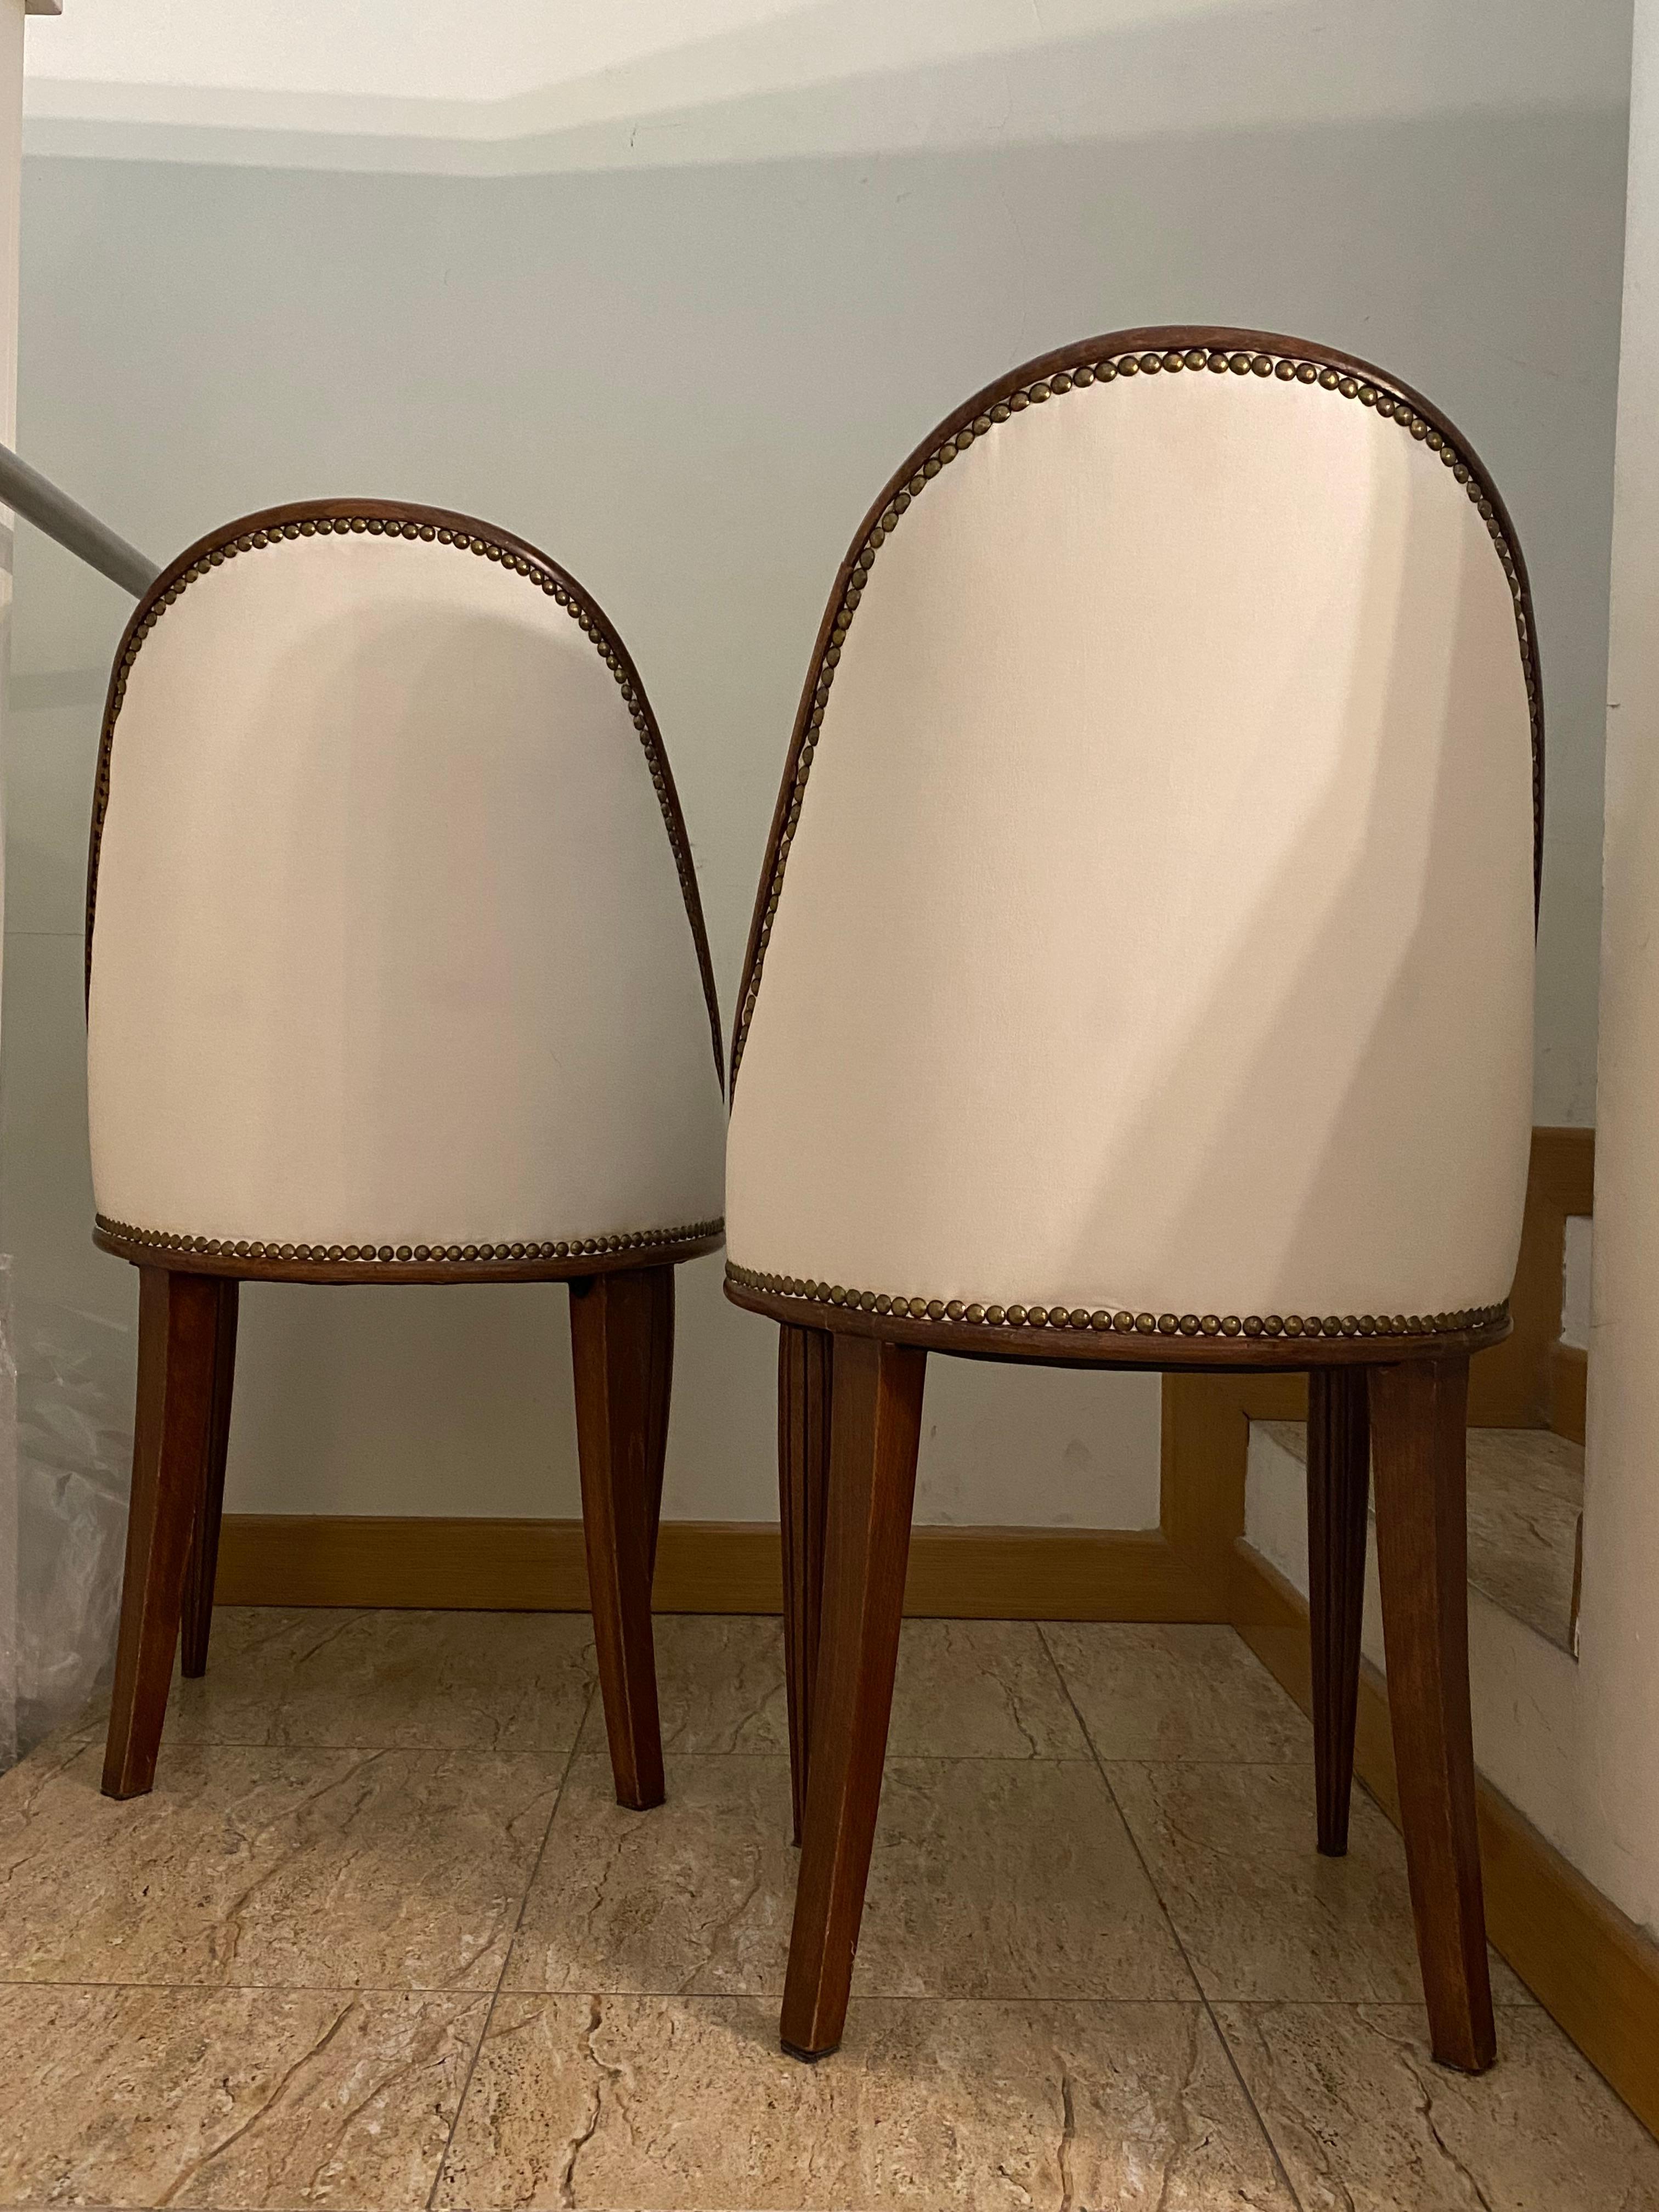 Beautiful pair of French chairs from the early years of the art deco style, made in Paris around 1915. They represent the best French design of the early 20th century. Reupholstered and restored the varnish, following the original techniques. They